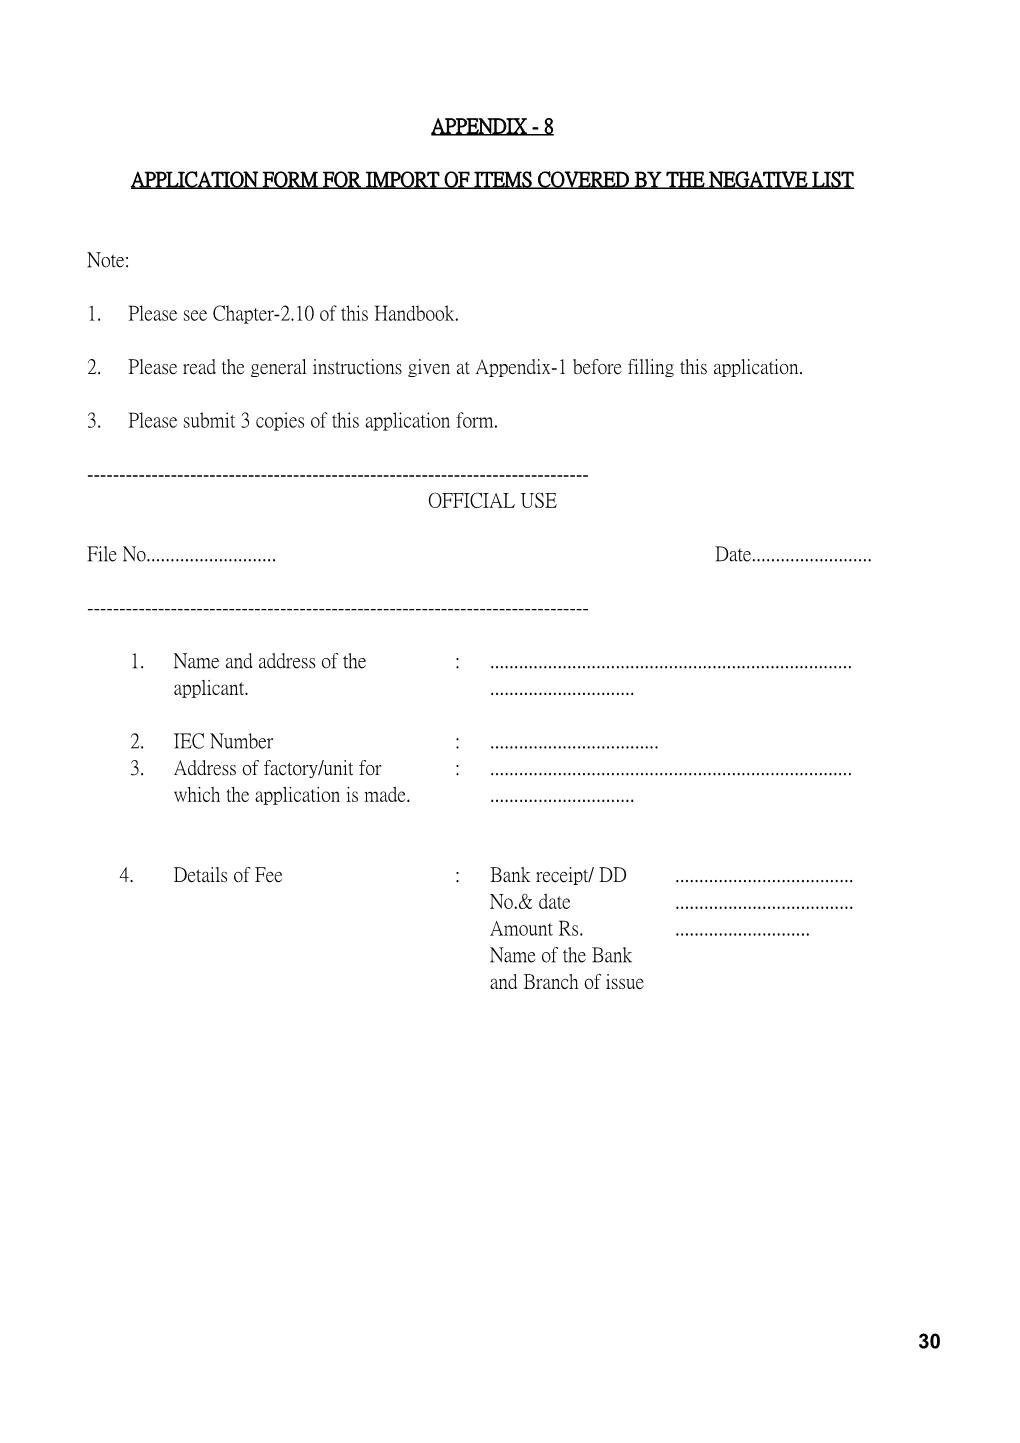 Application Form for Import of Items Covered by the Negative List